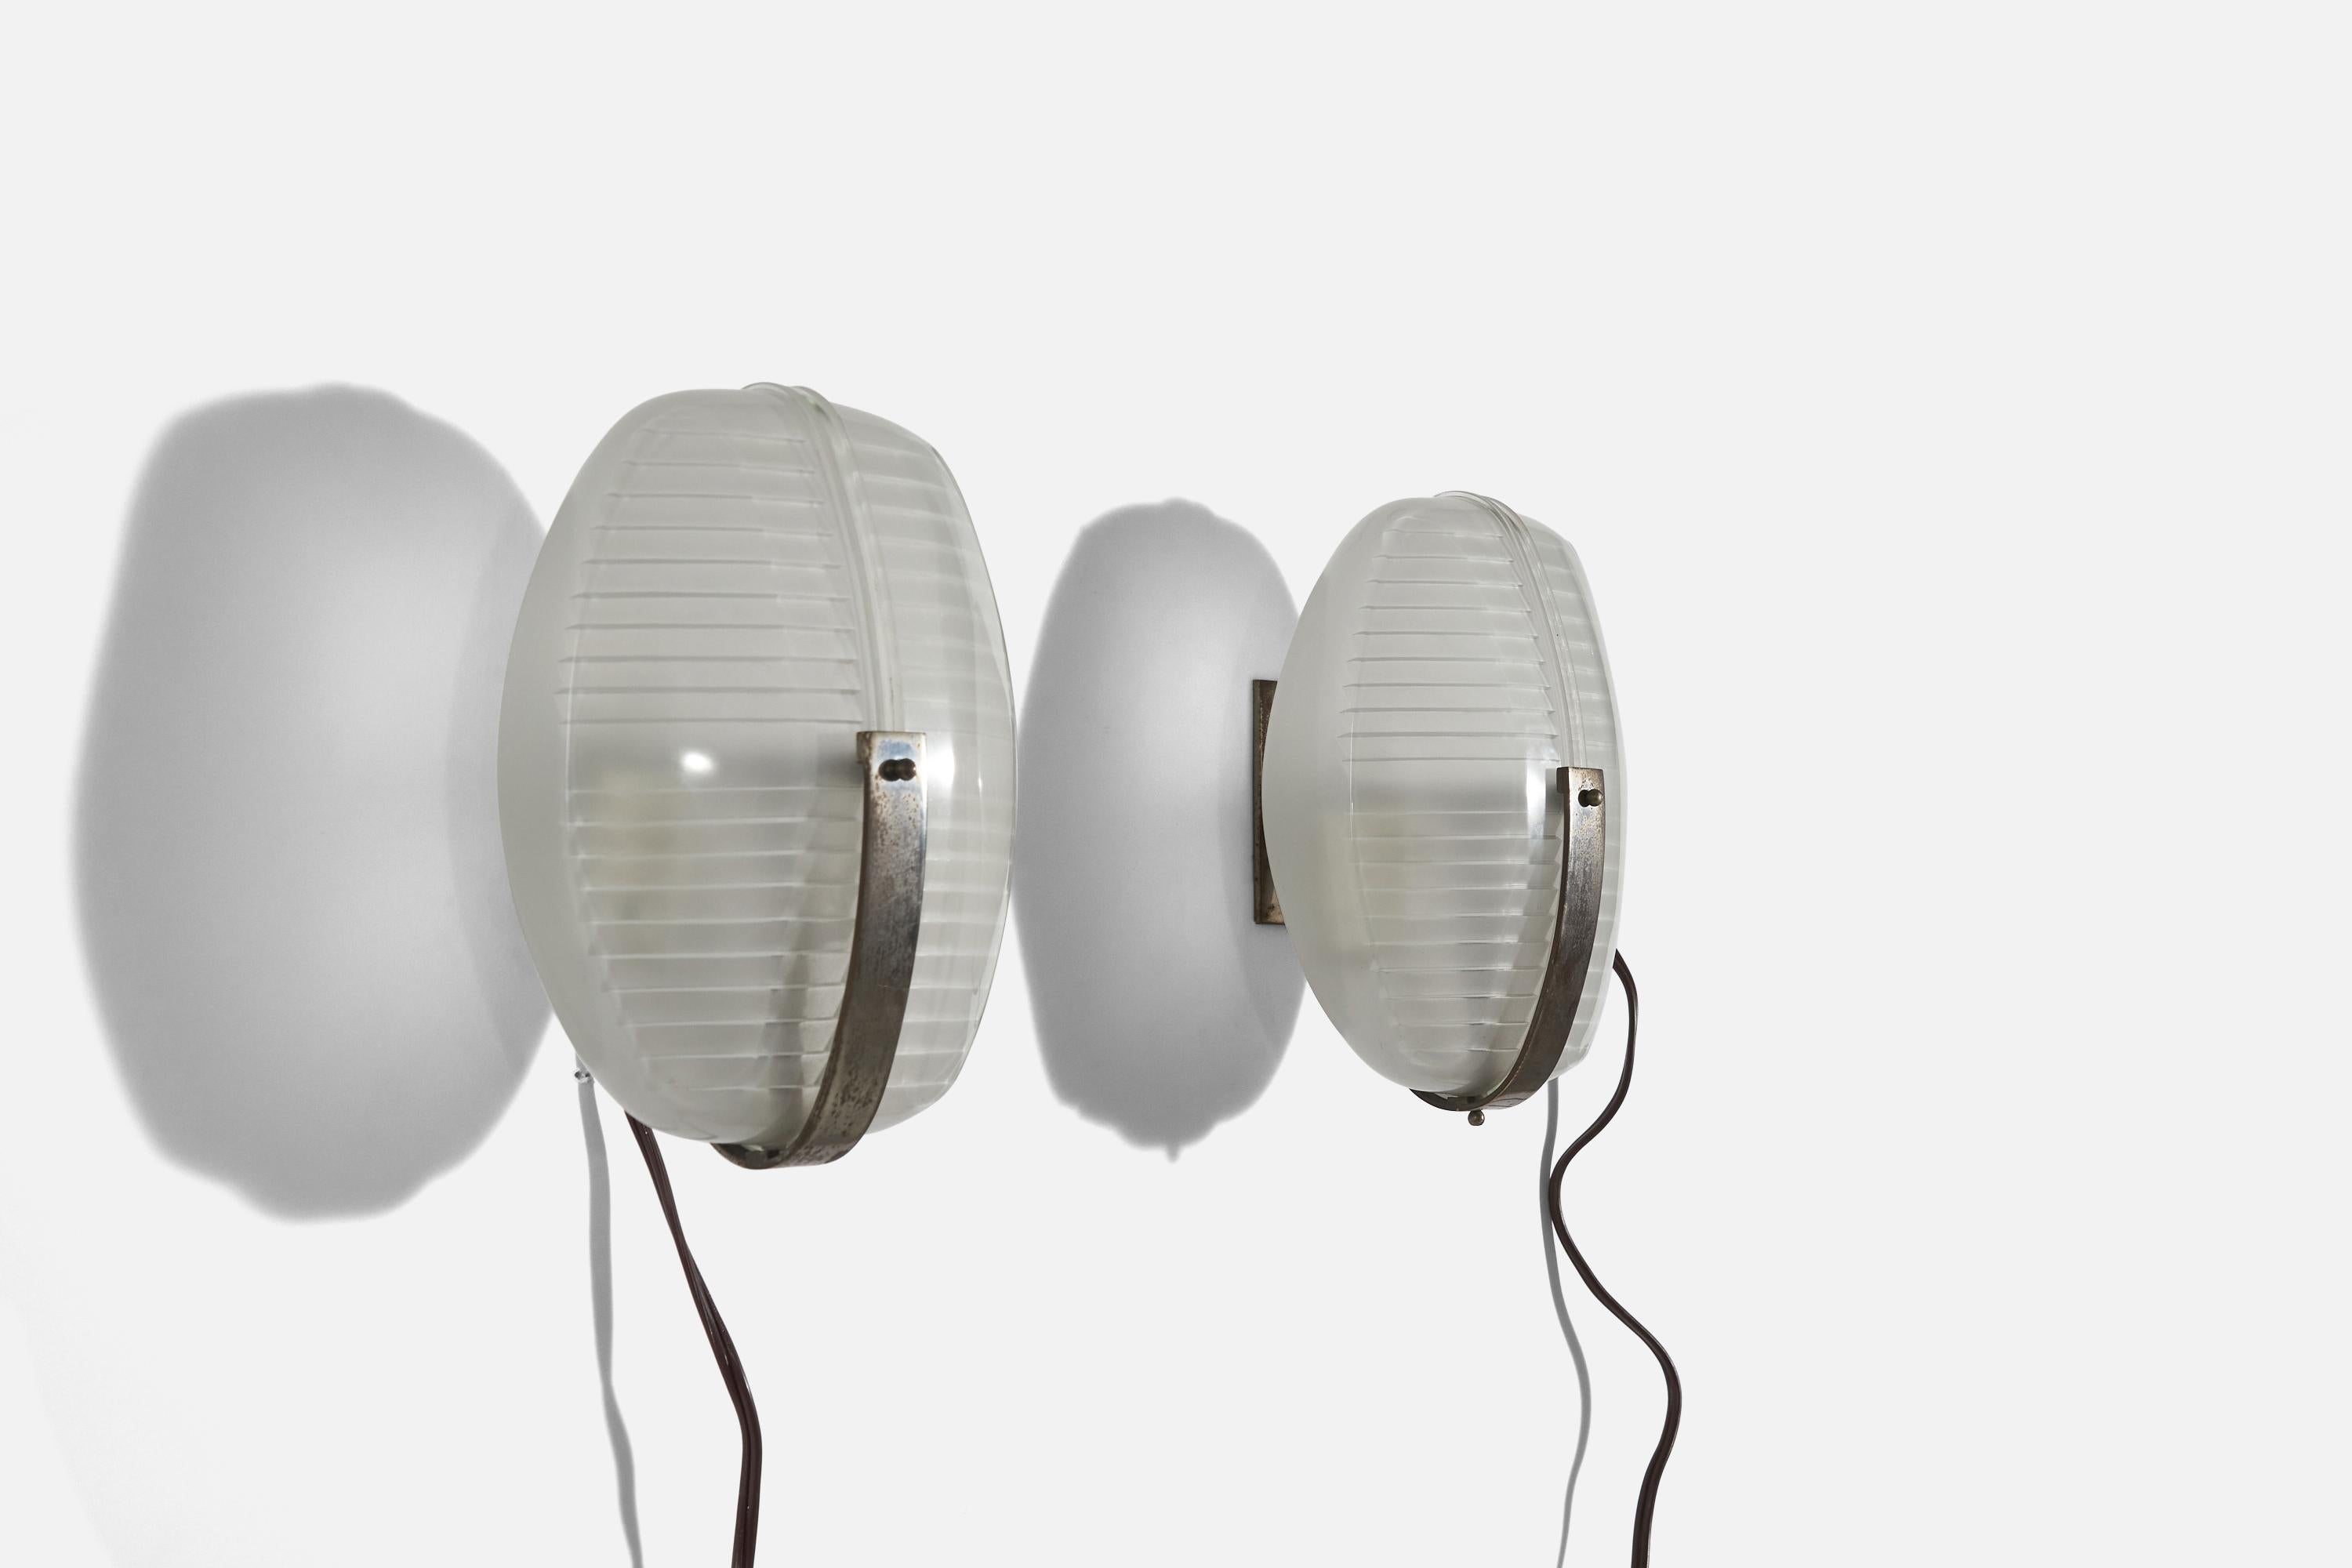 A pair of metal and glass wall lights designed by Vico Magistretti and produced by Artemide, Italy, 1960s.

Please note lamps are configured for hardwire.

Dimensions of back plate (inches) : 3.875 x 1.8125 x 0.125 (H x W x D).